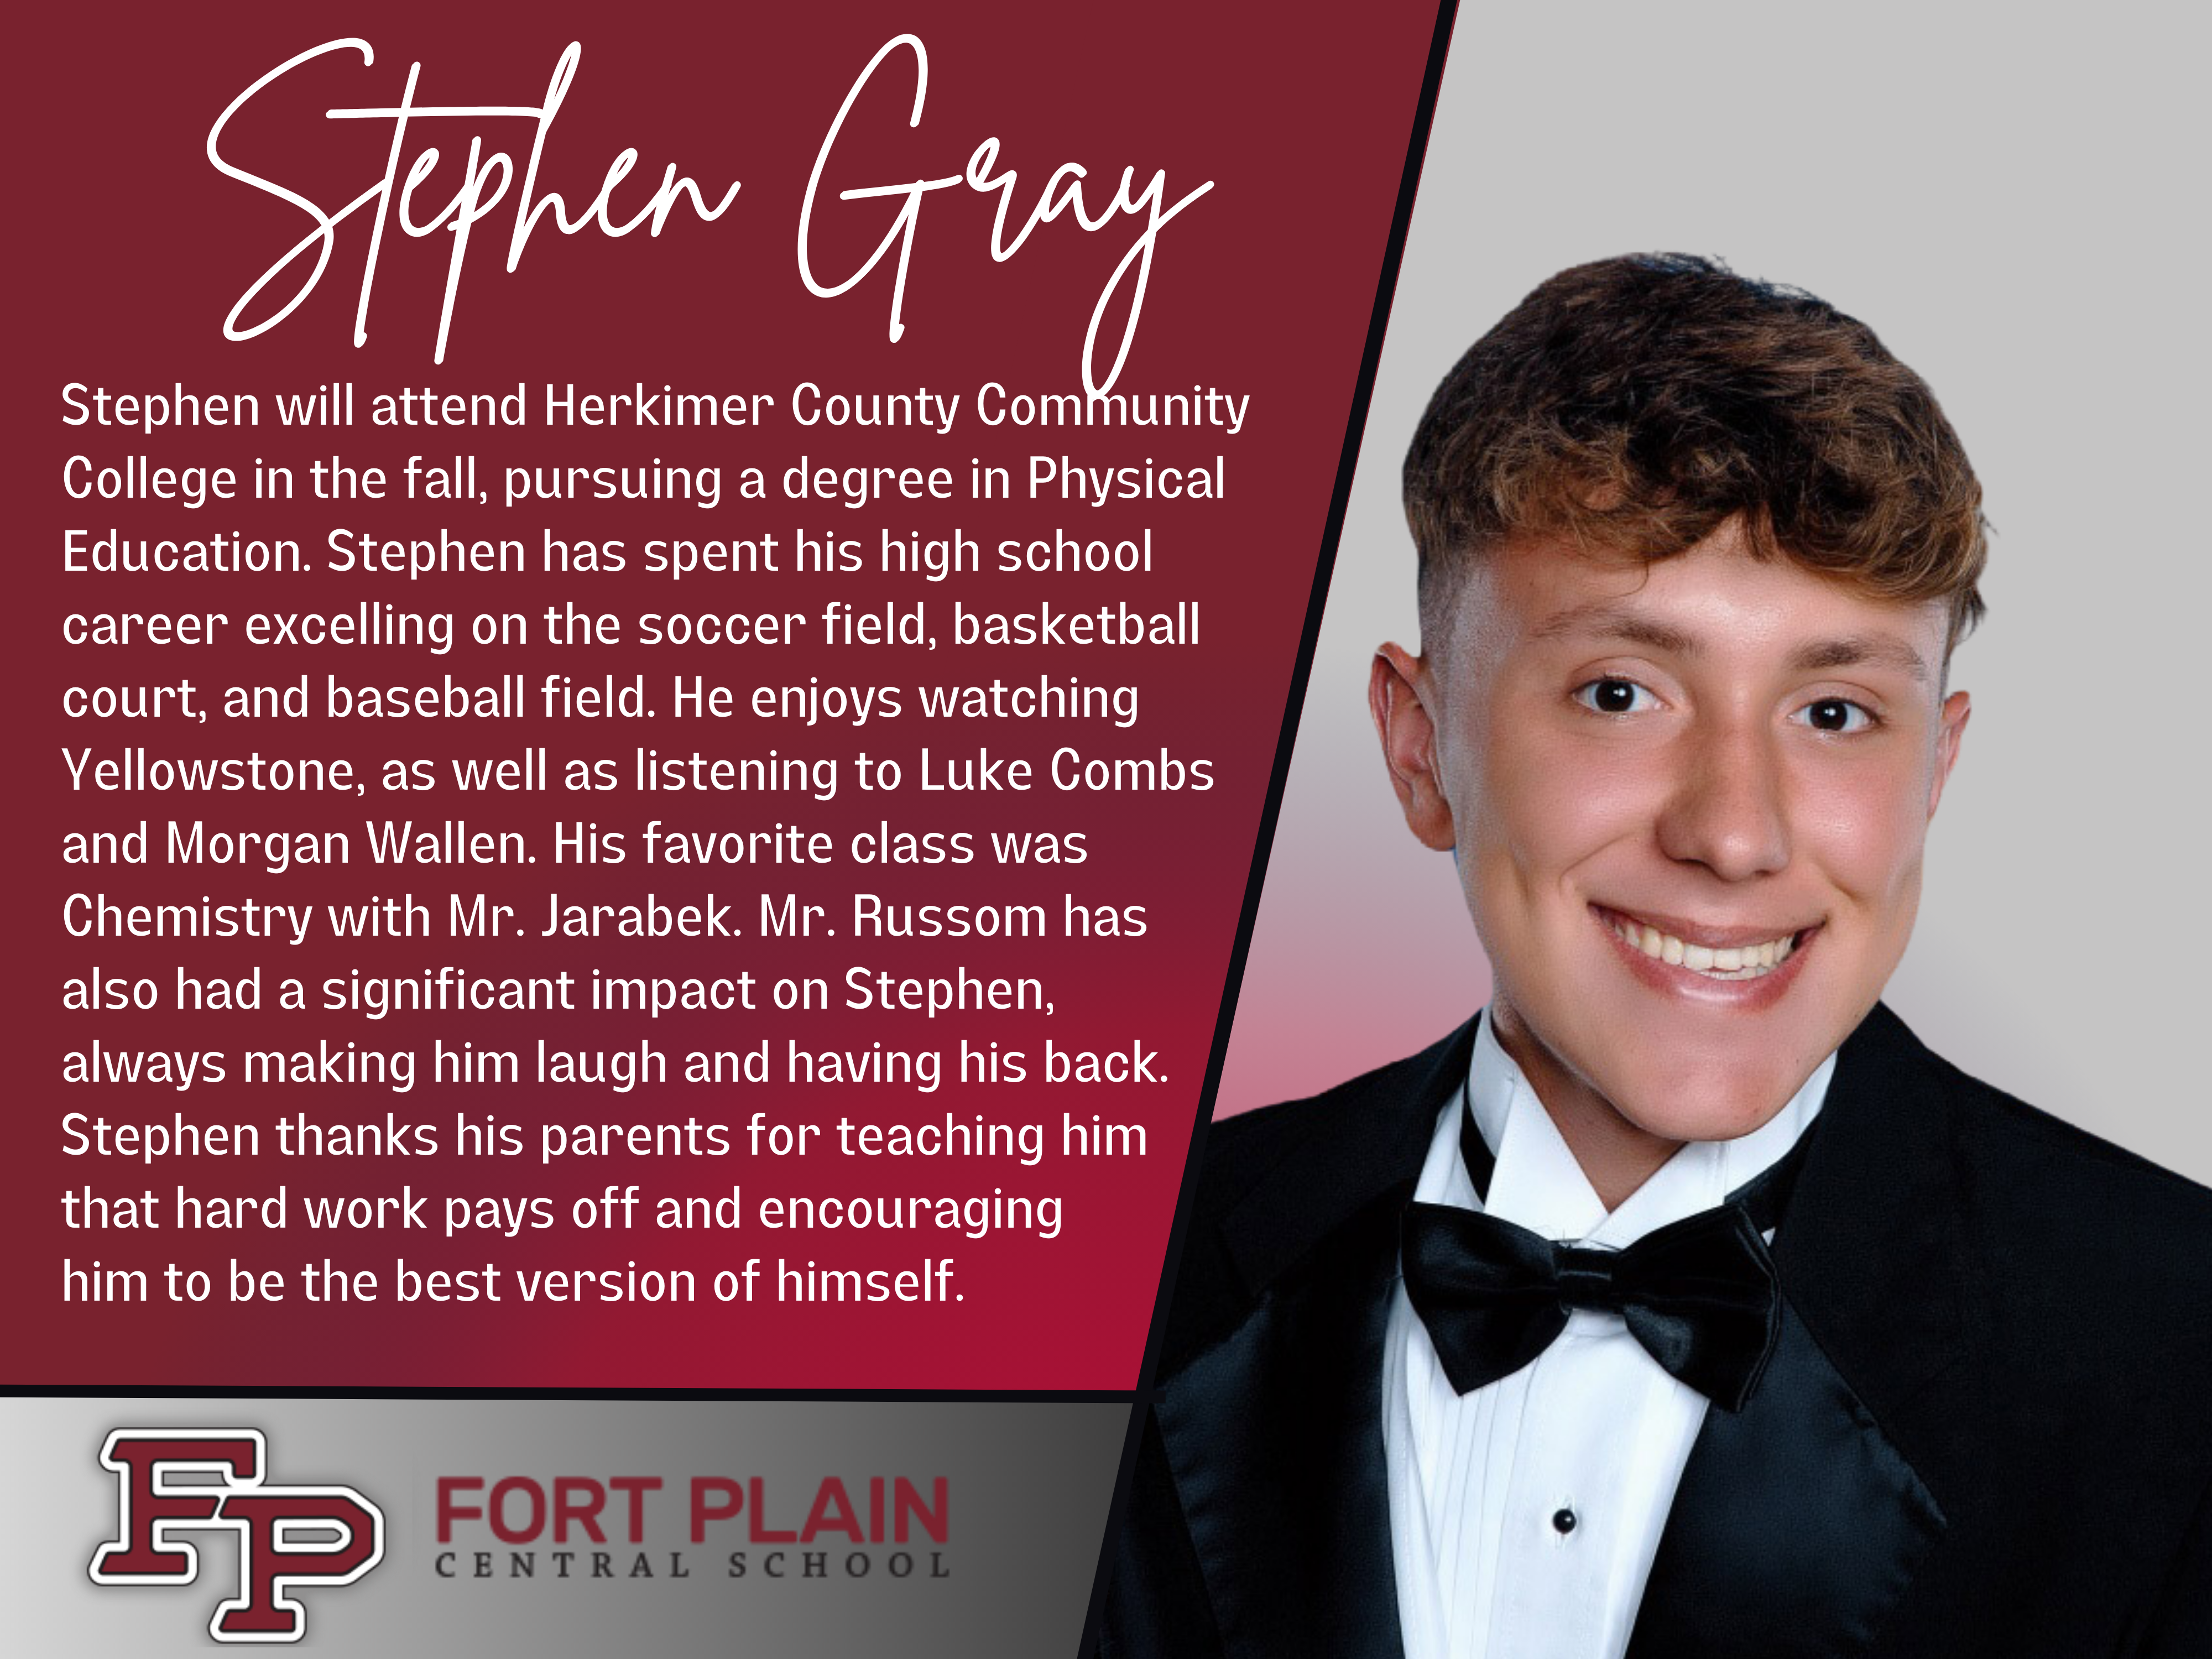 photo of and info about Stephen